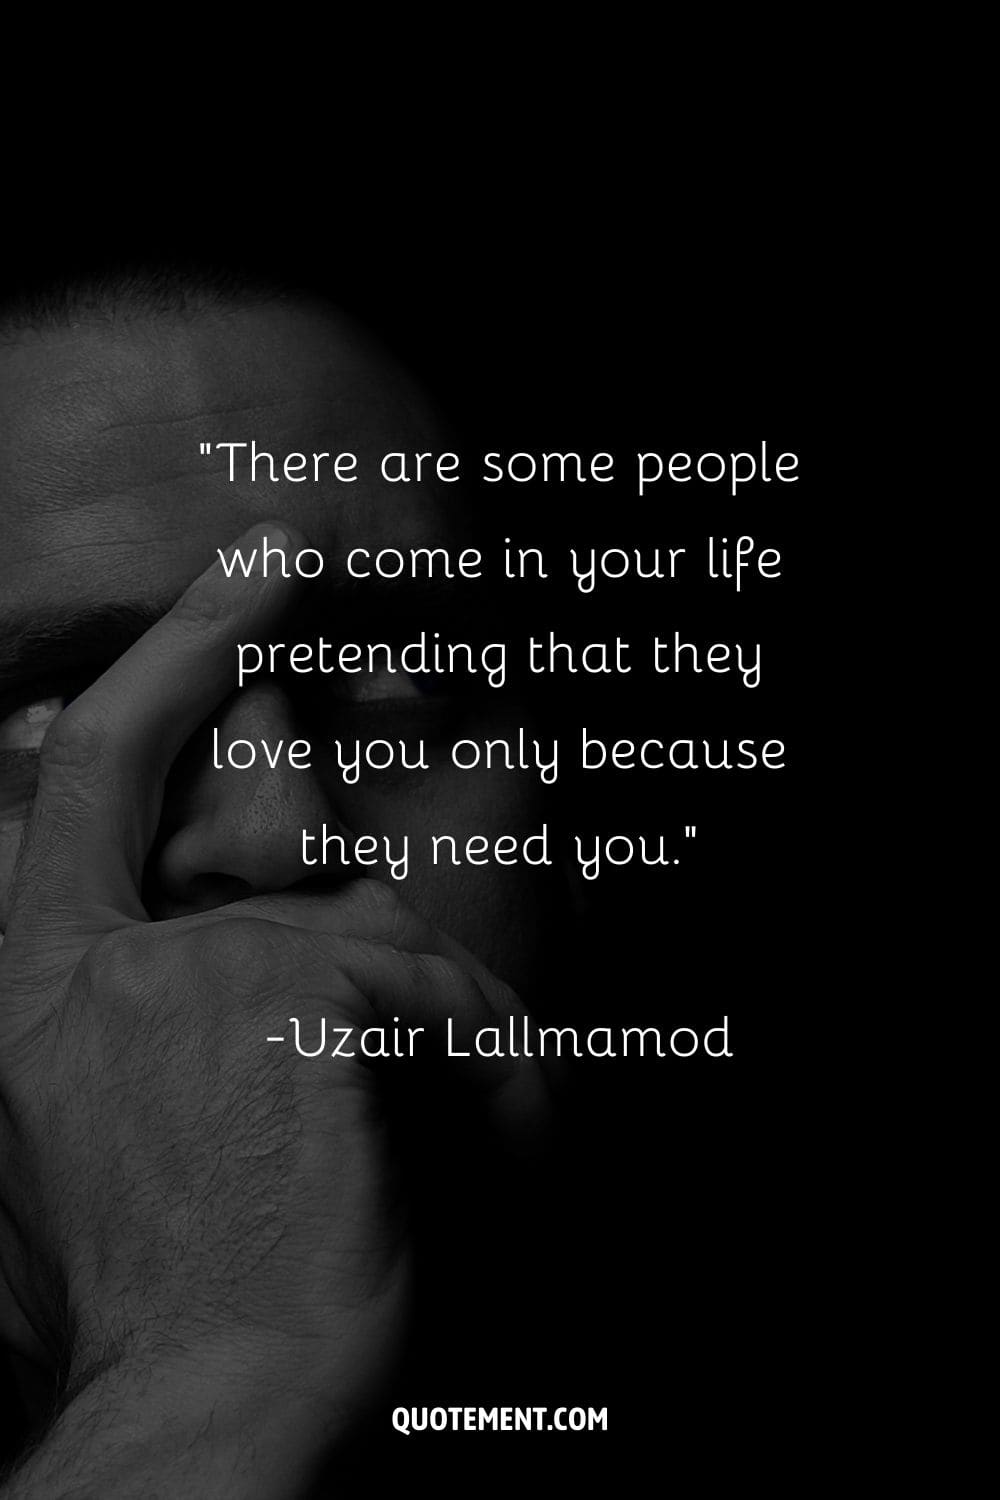 “There are some people who come in your life pretending that they love you only because they need you.” ― Uzair Lallmamod